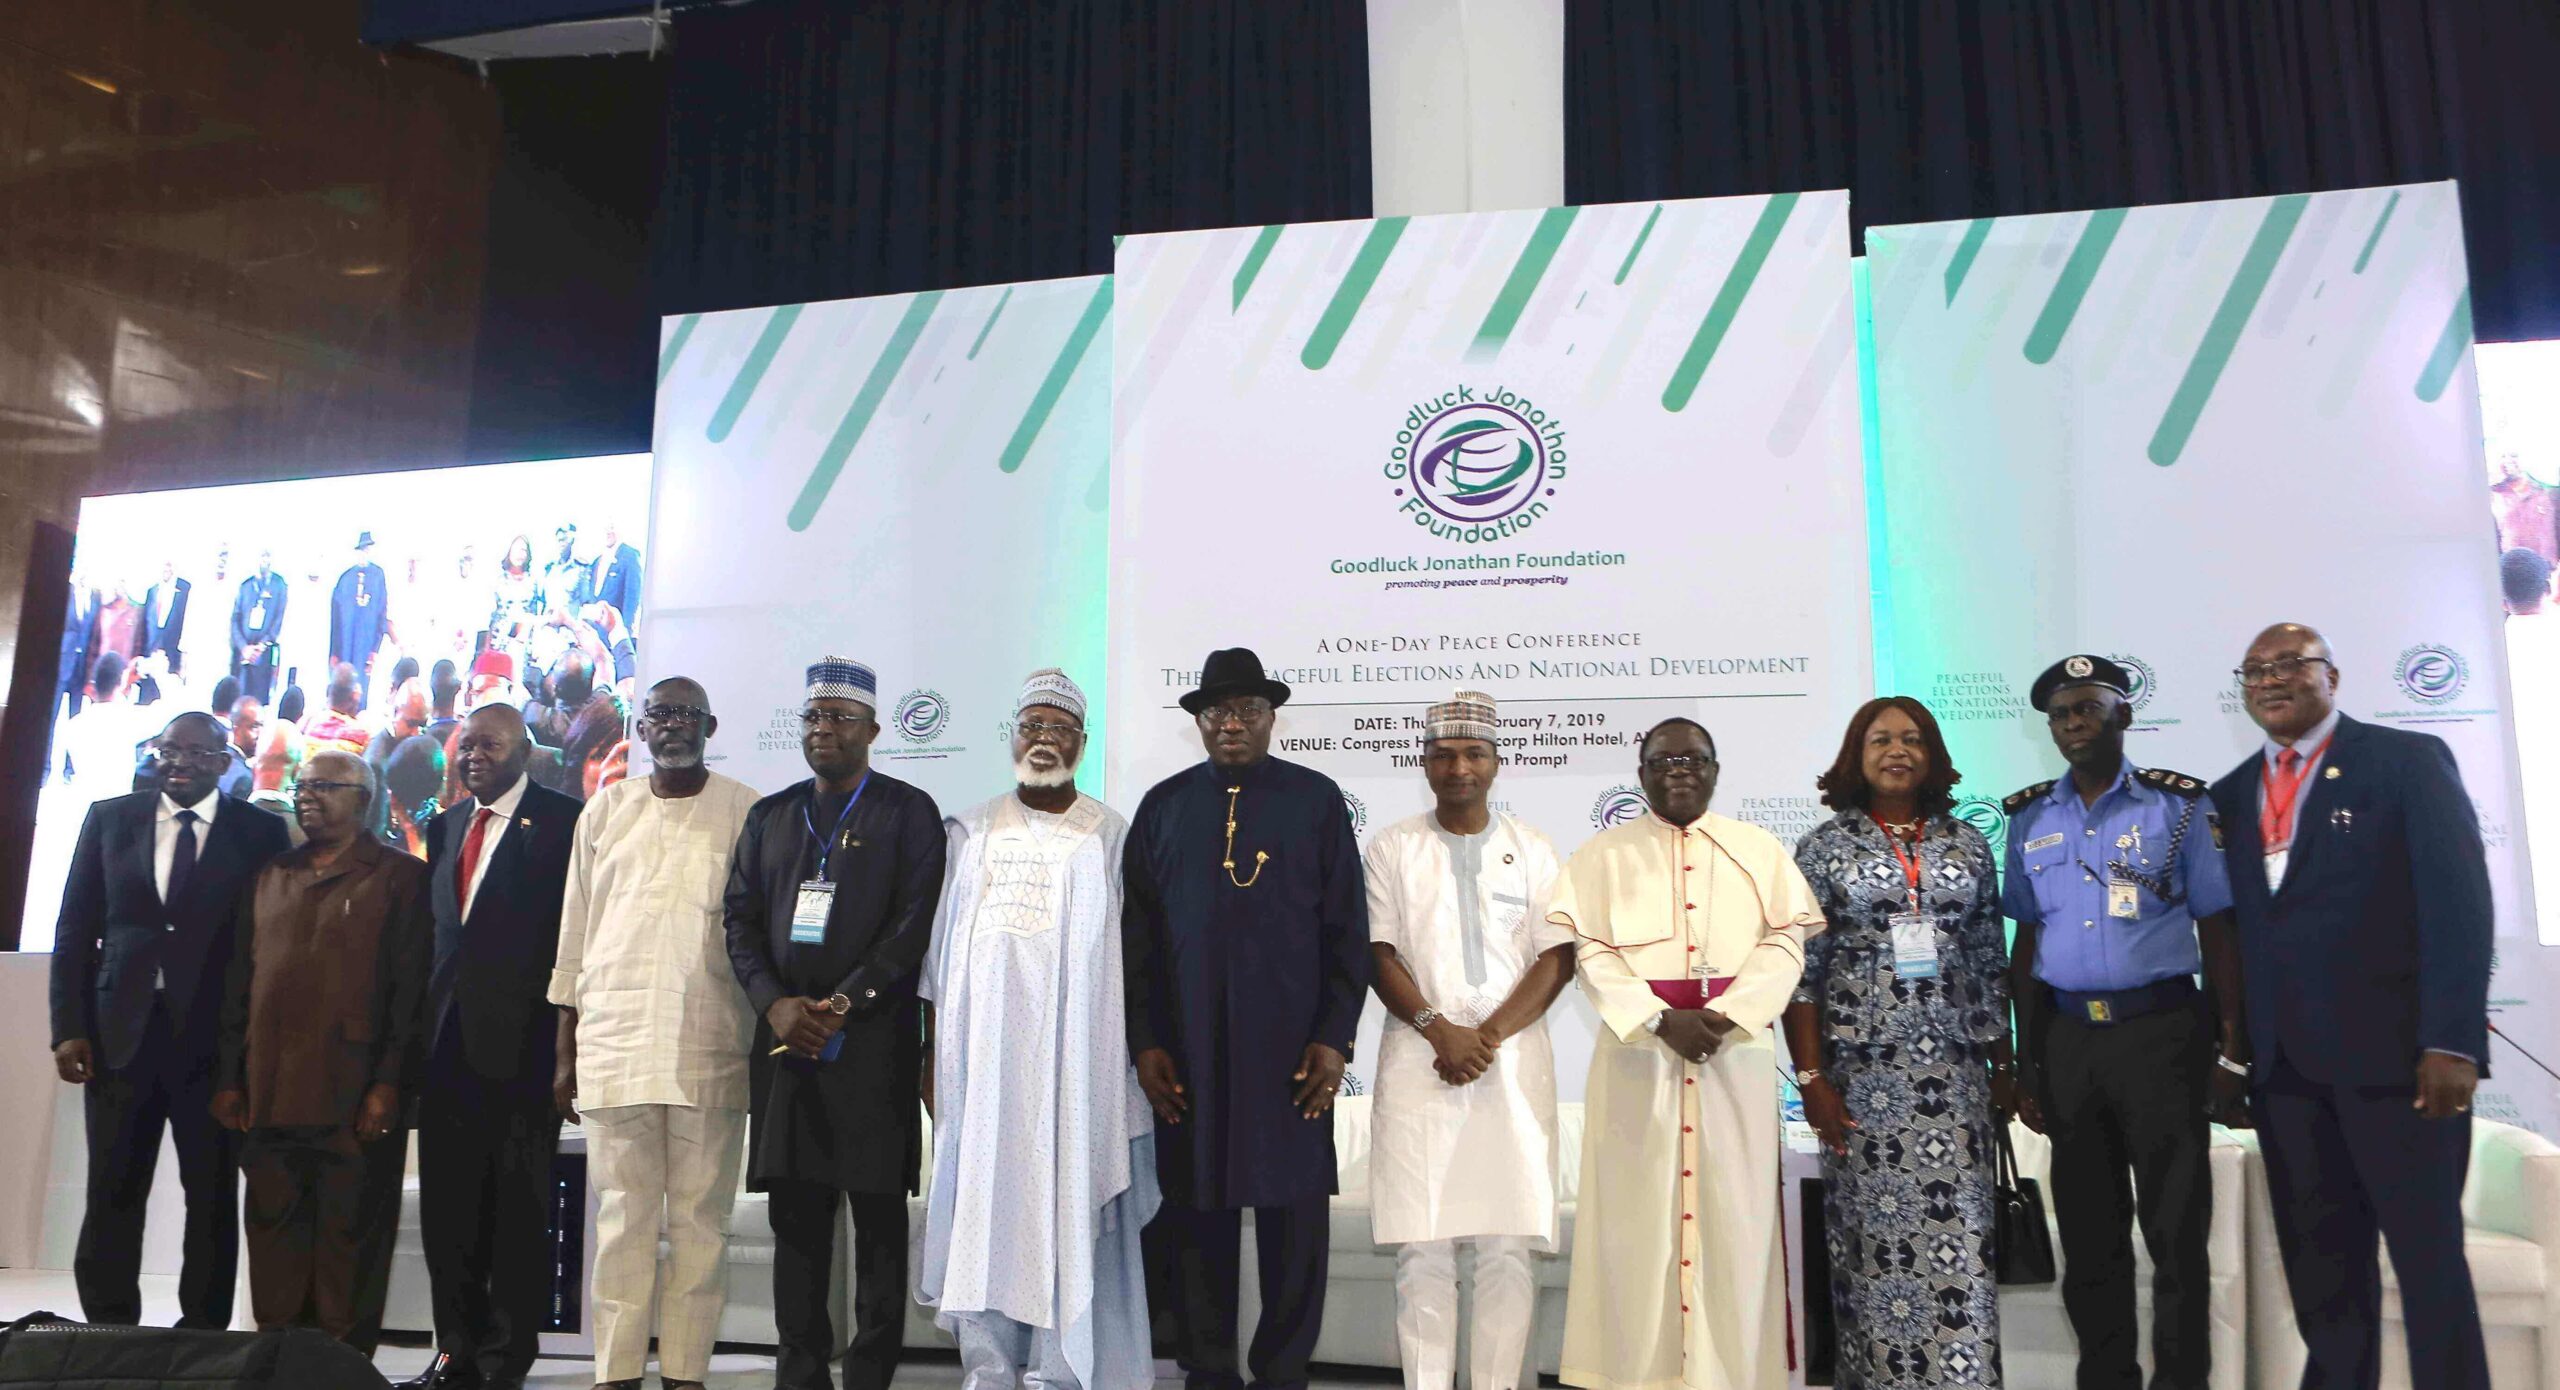 Communique from Peace Conference organised by the Goodluck Jonathan Foundation on Thursday, 7th February 2019